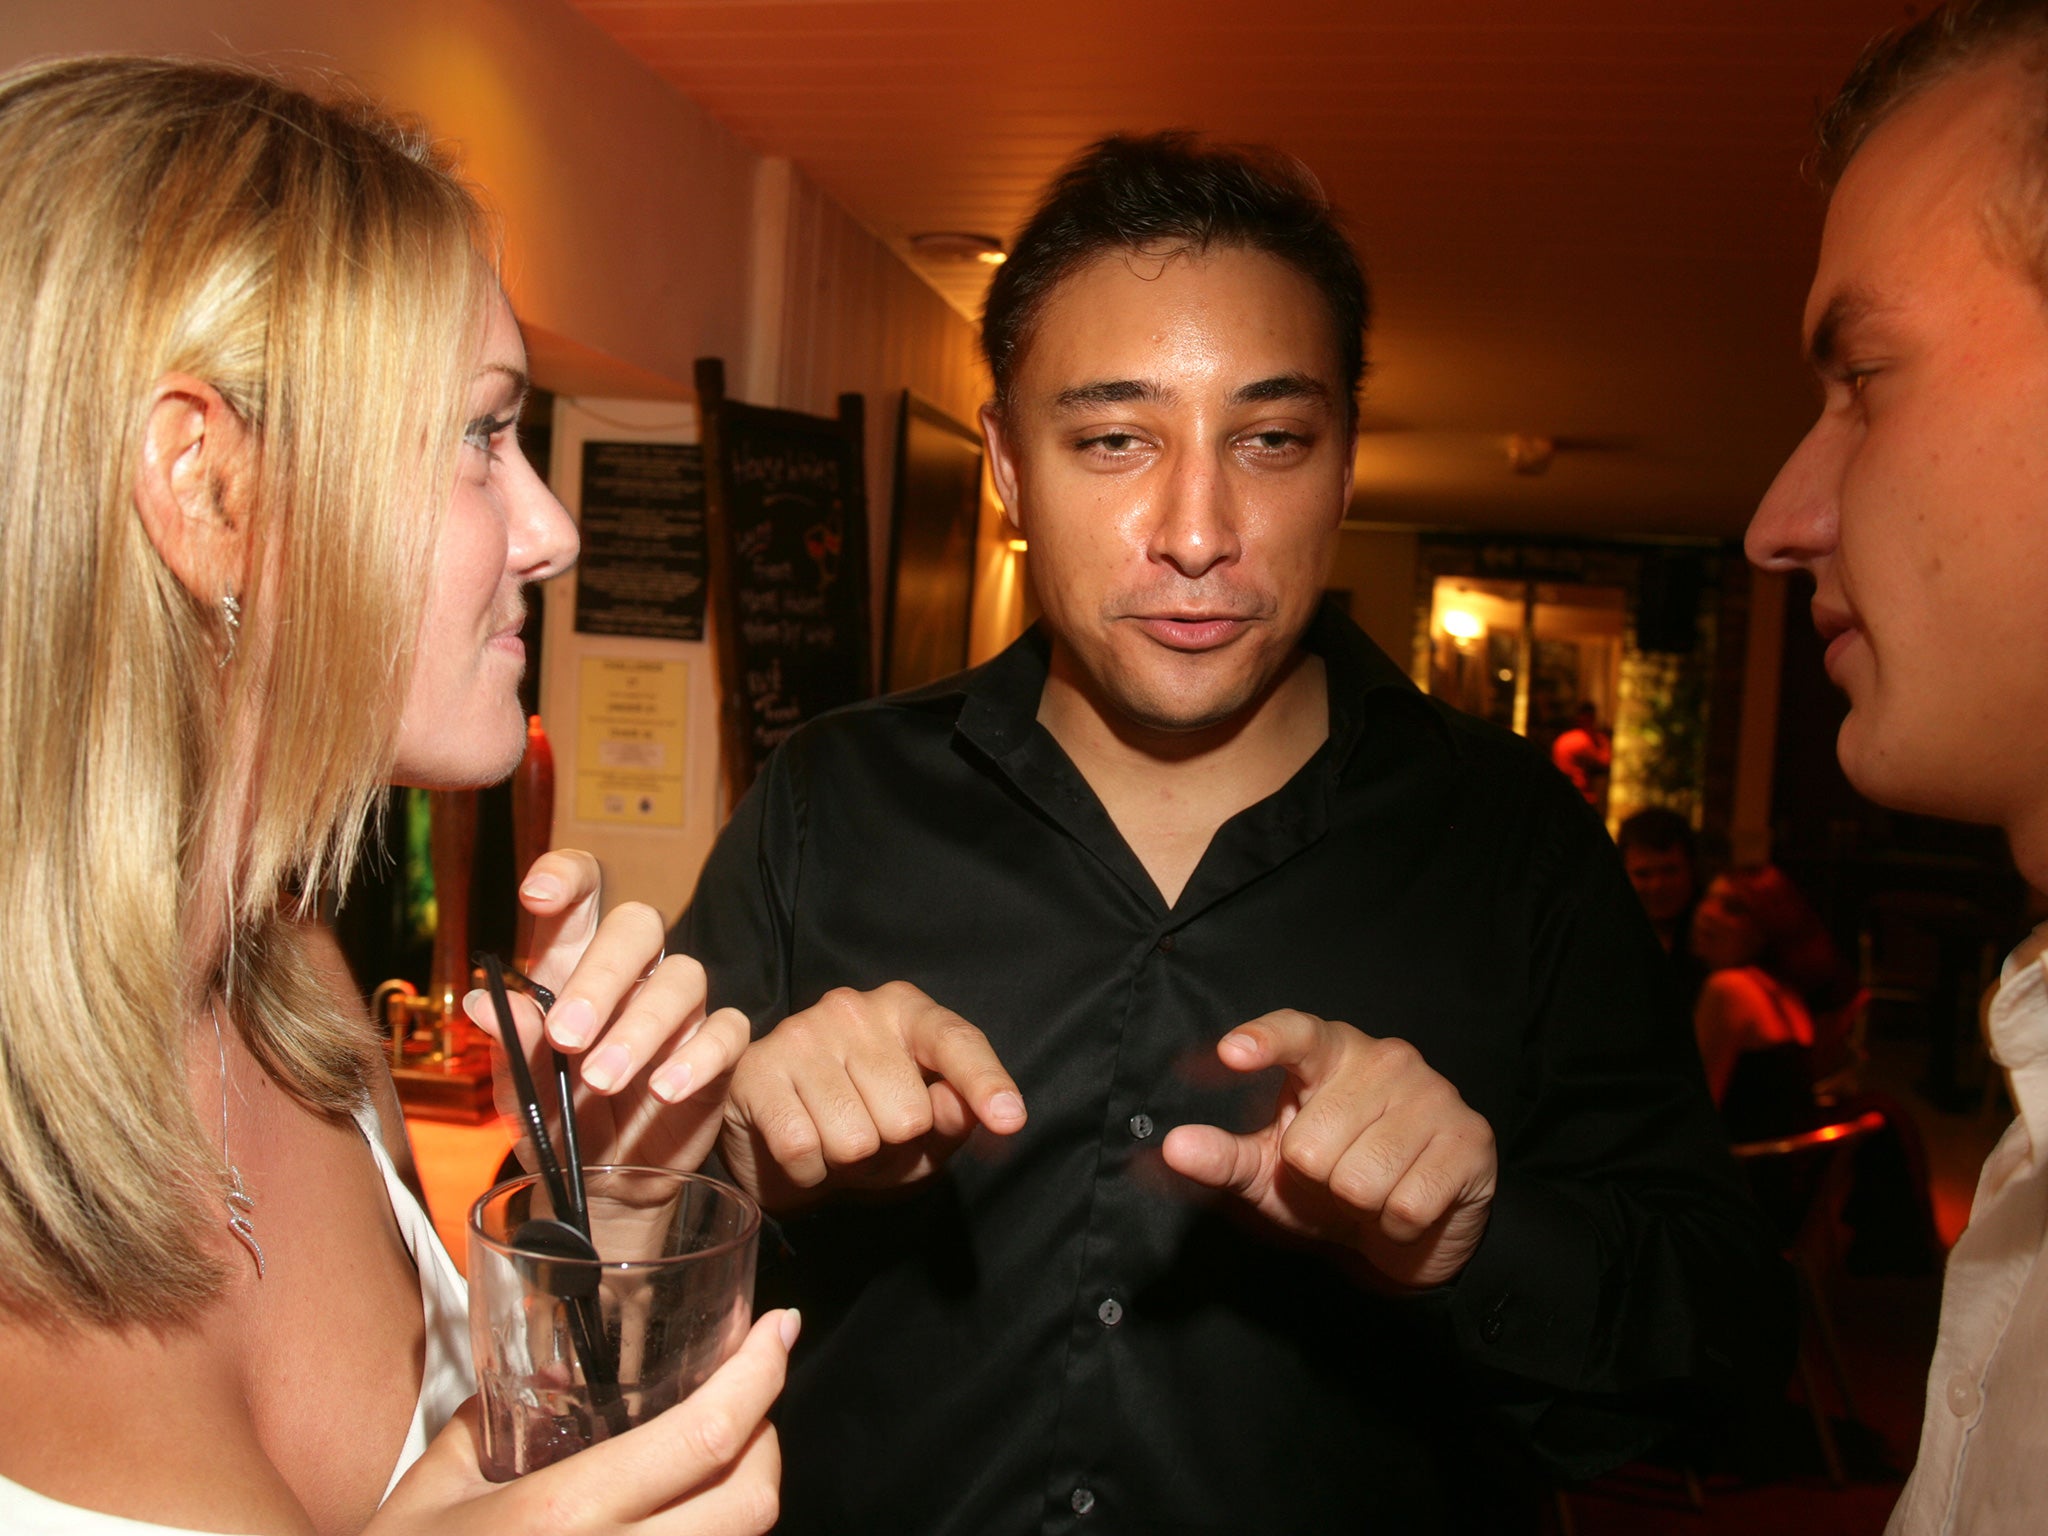 Former youth organiser Mark Clarke, centre, pictured at a Conservative event in 2006, has been expelled from the party